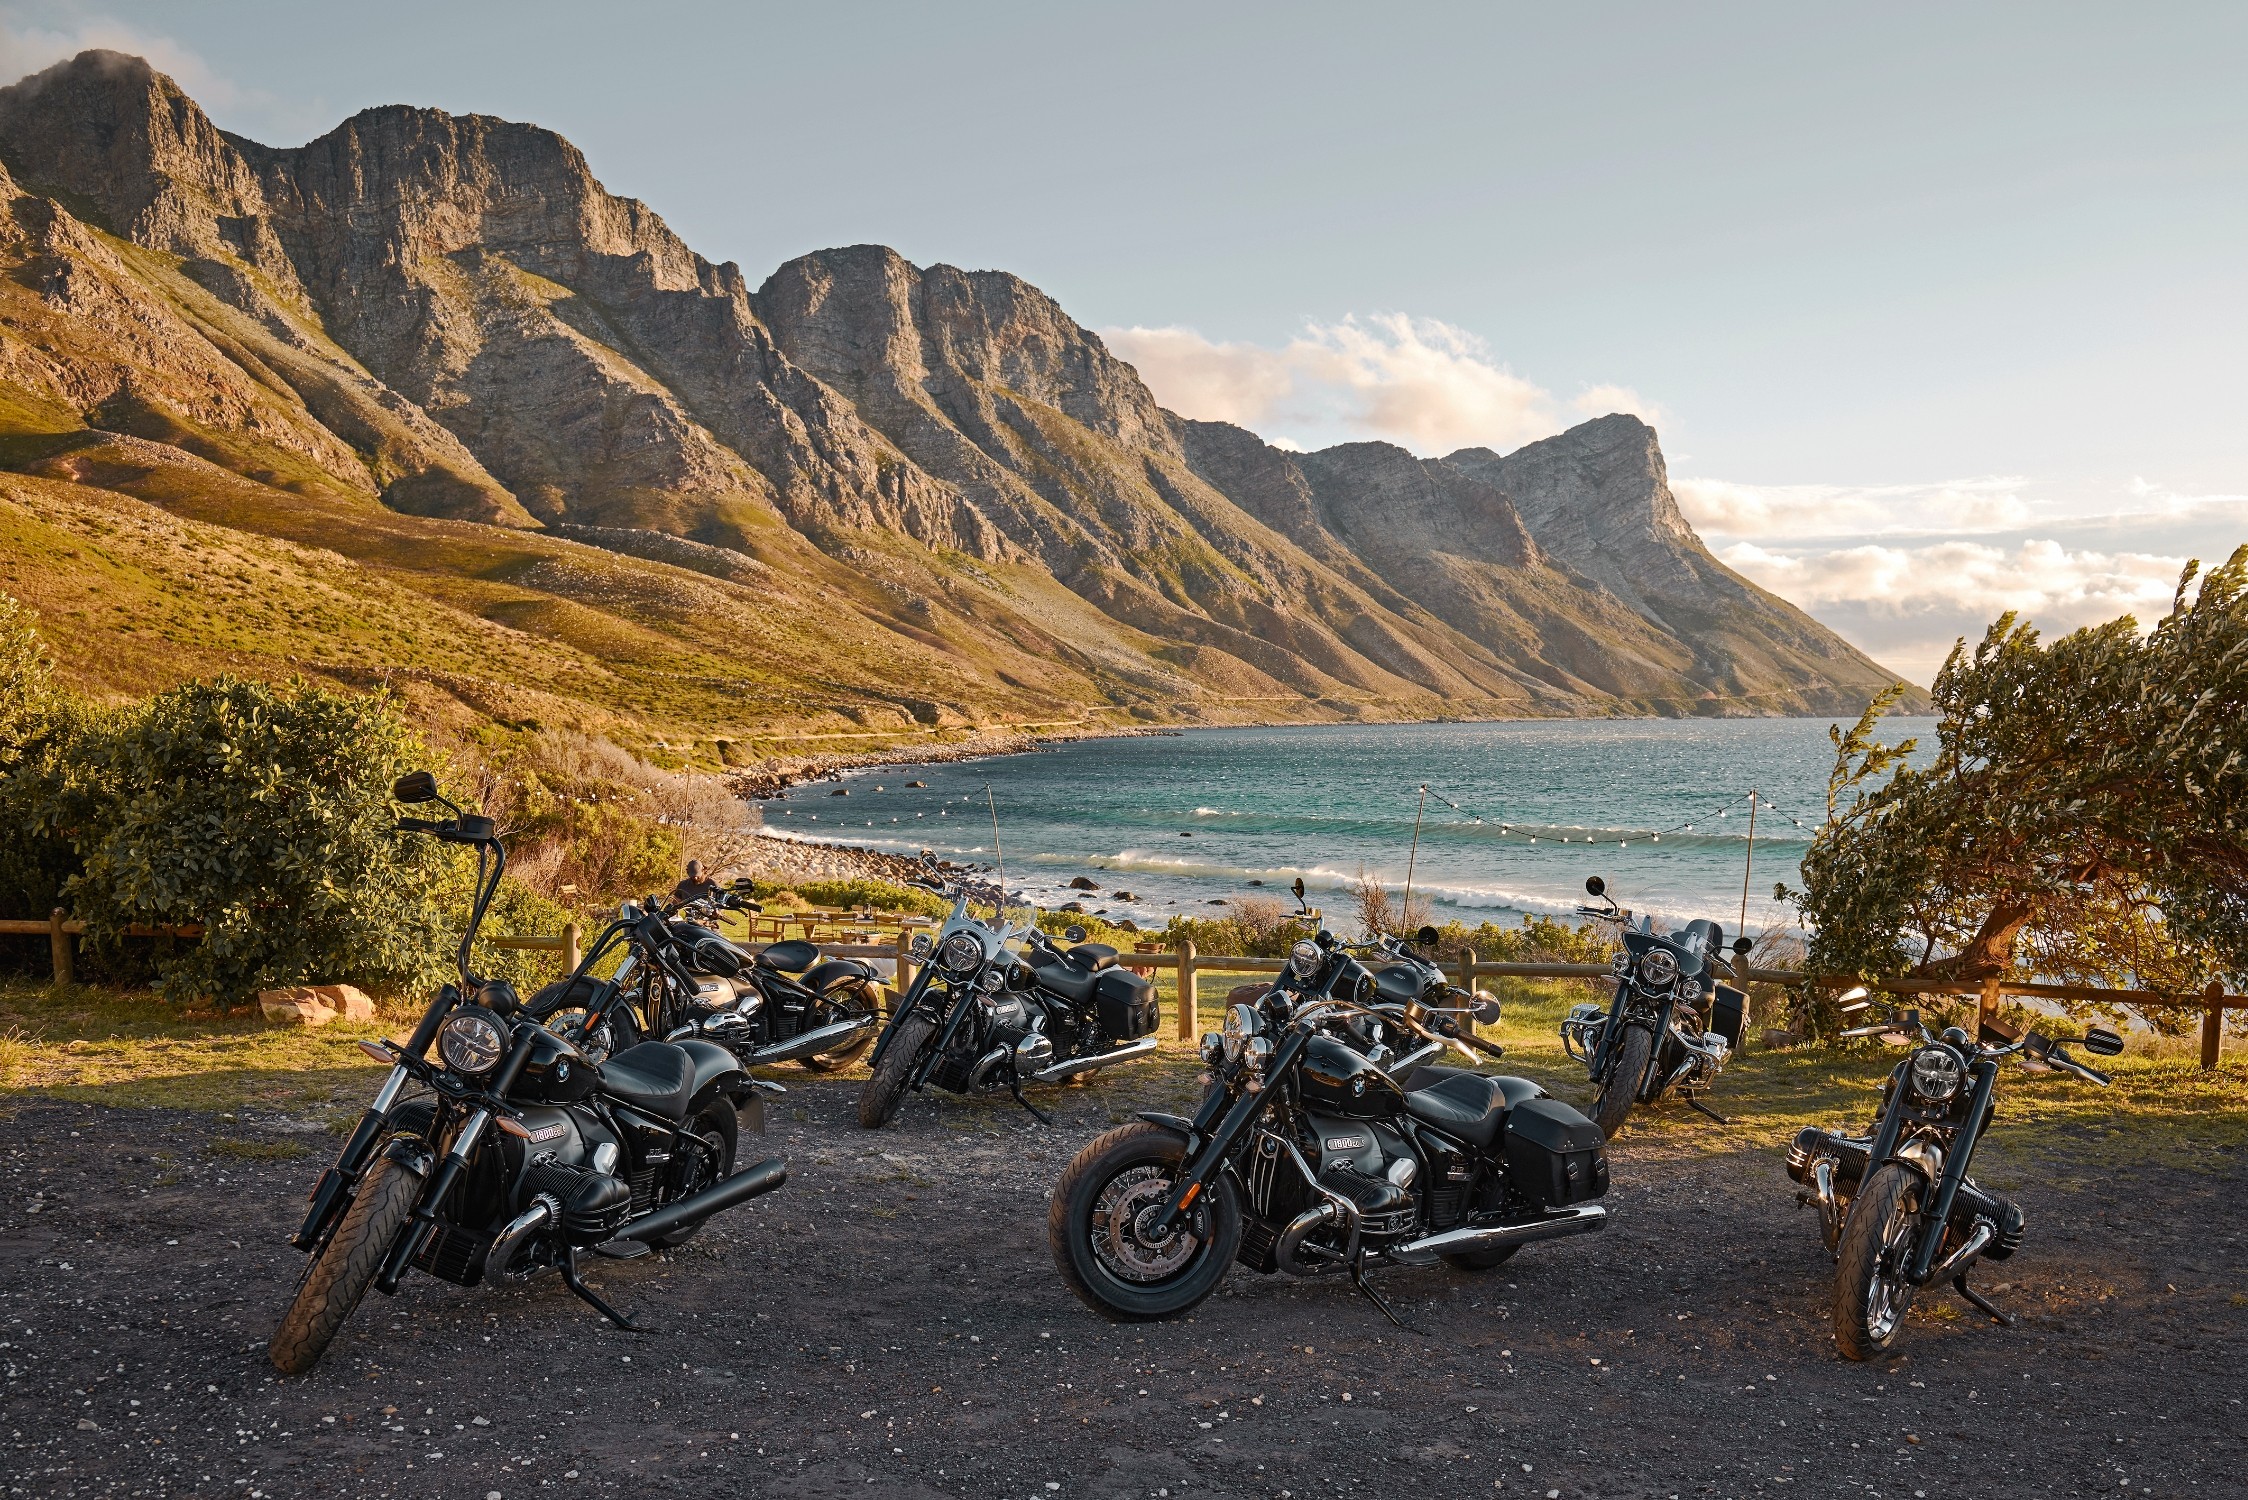 A group of 5 BMW R 18 motorcycles near the beach at sunset